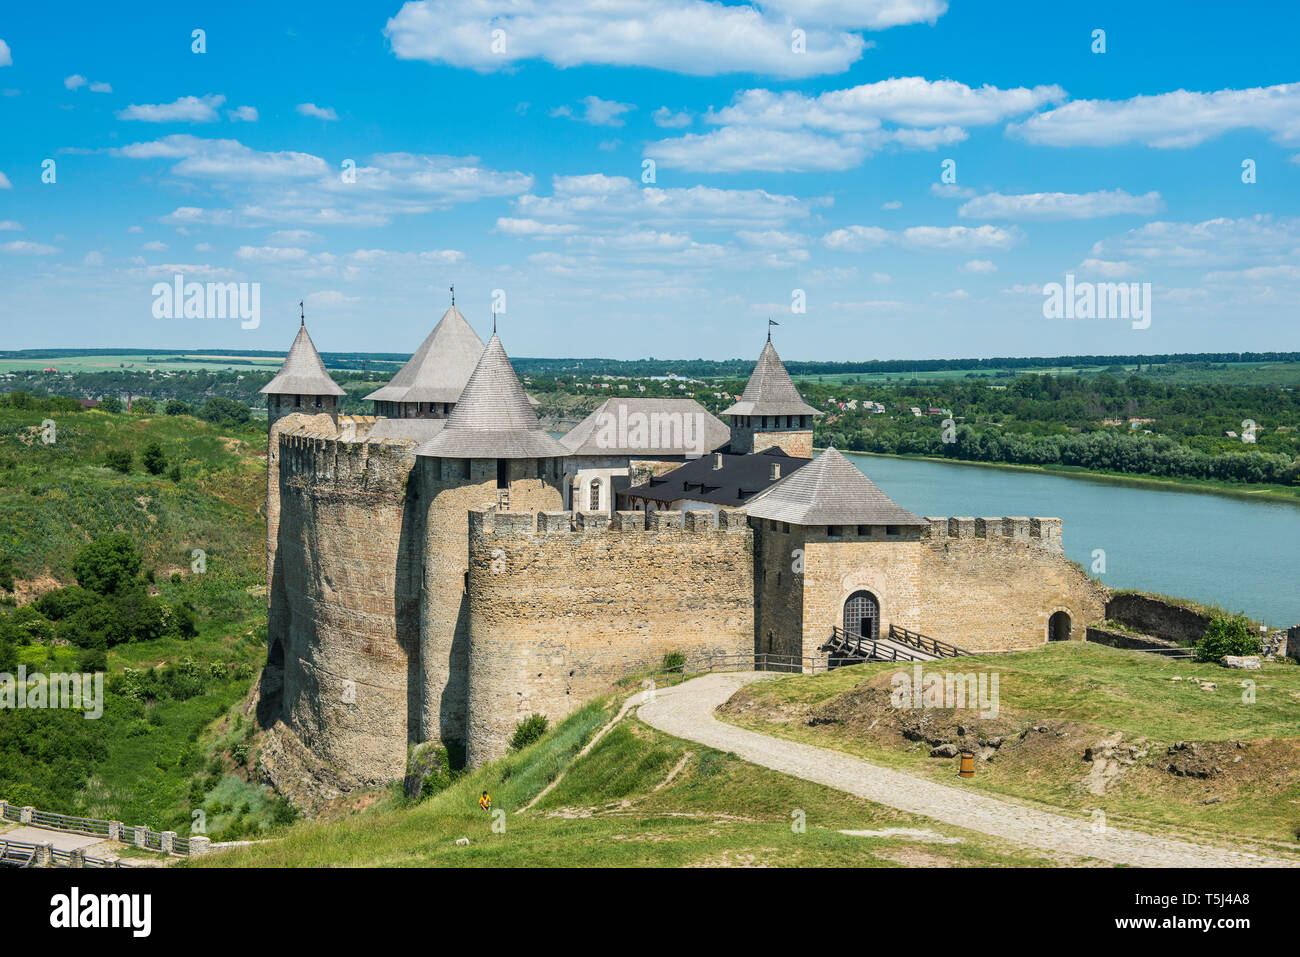 Khotyn Fortress on the river banks of the Dniester, Ukraine Stock Photo